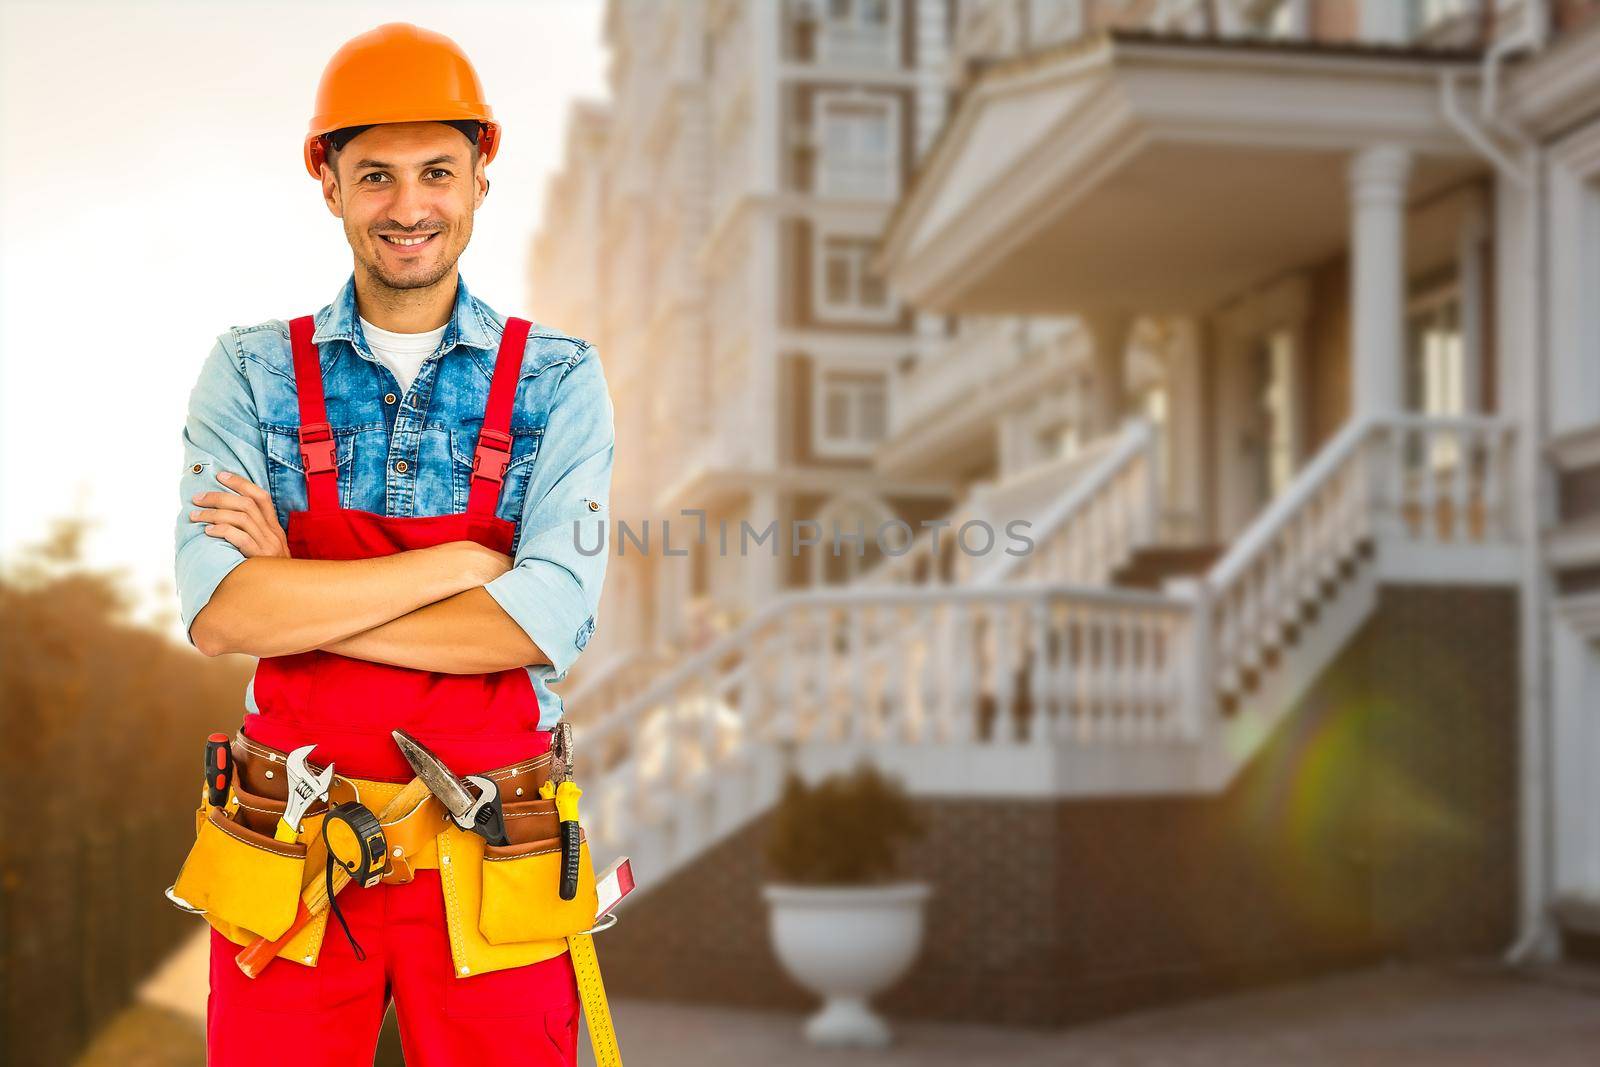 Smiling Construction worker man. Architecture background.